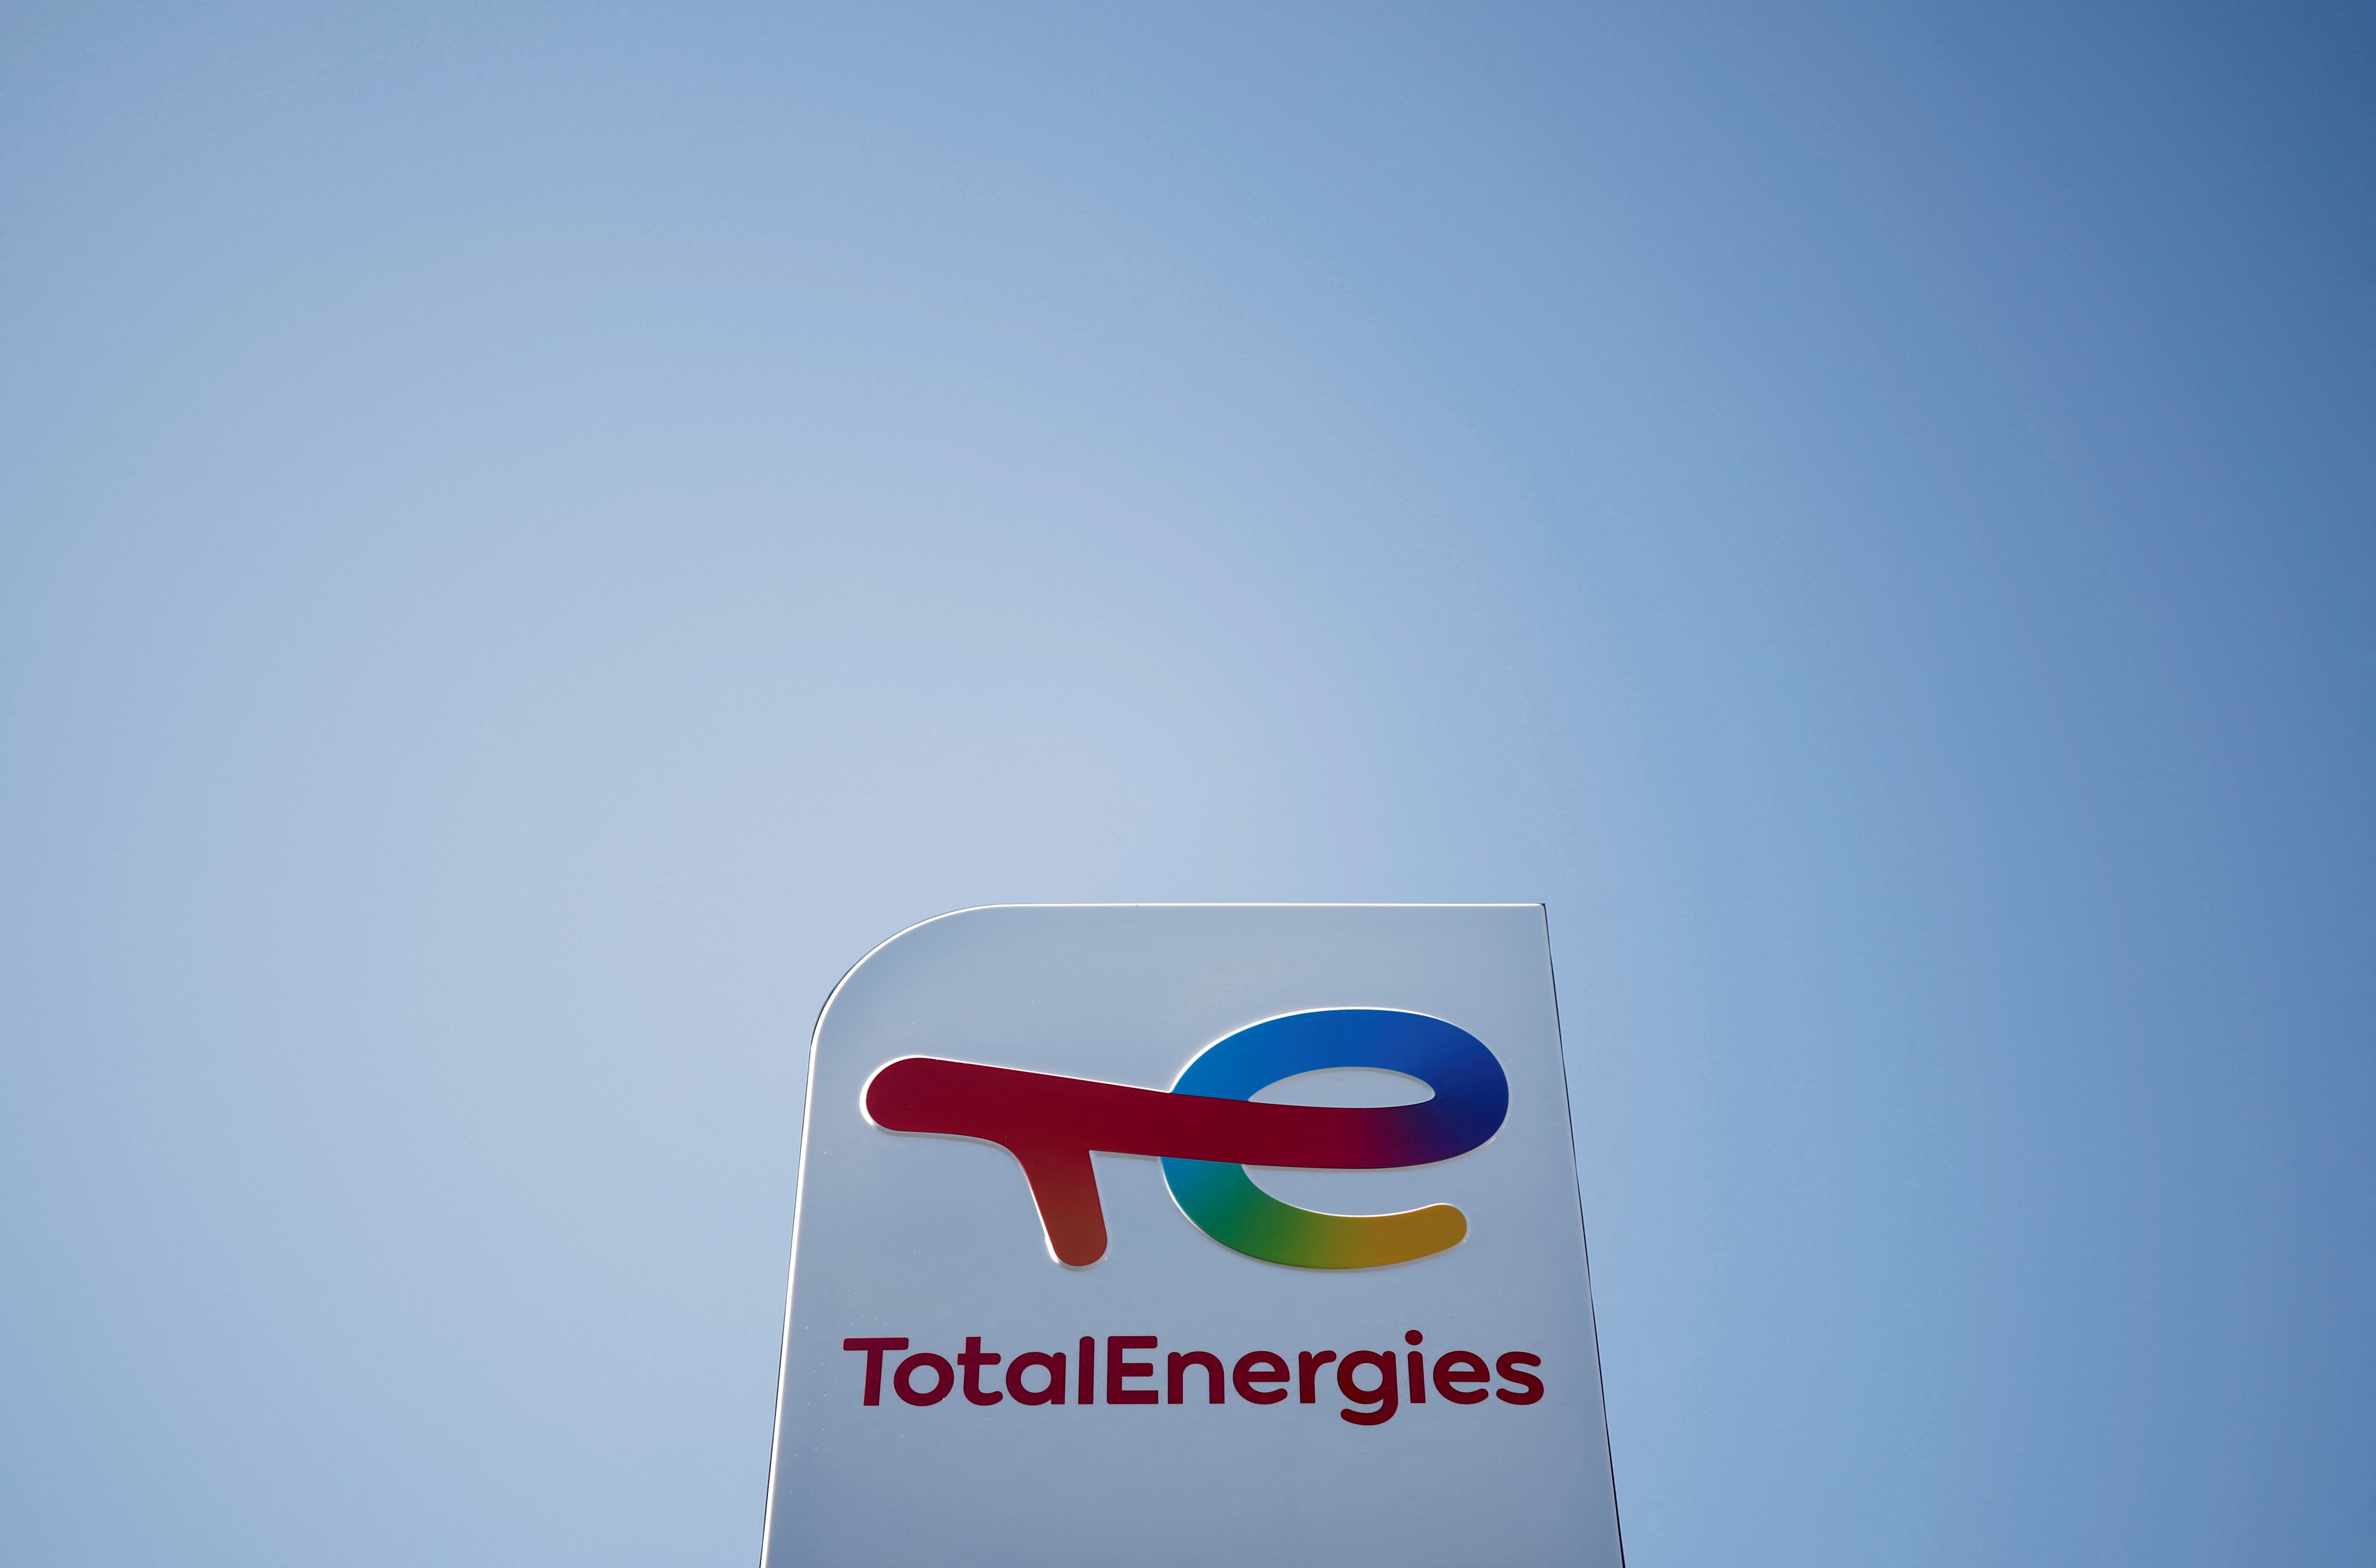 The logo of French oil and gas company TotalEnergies at a petrol station in Treillieres